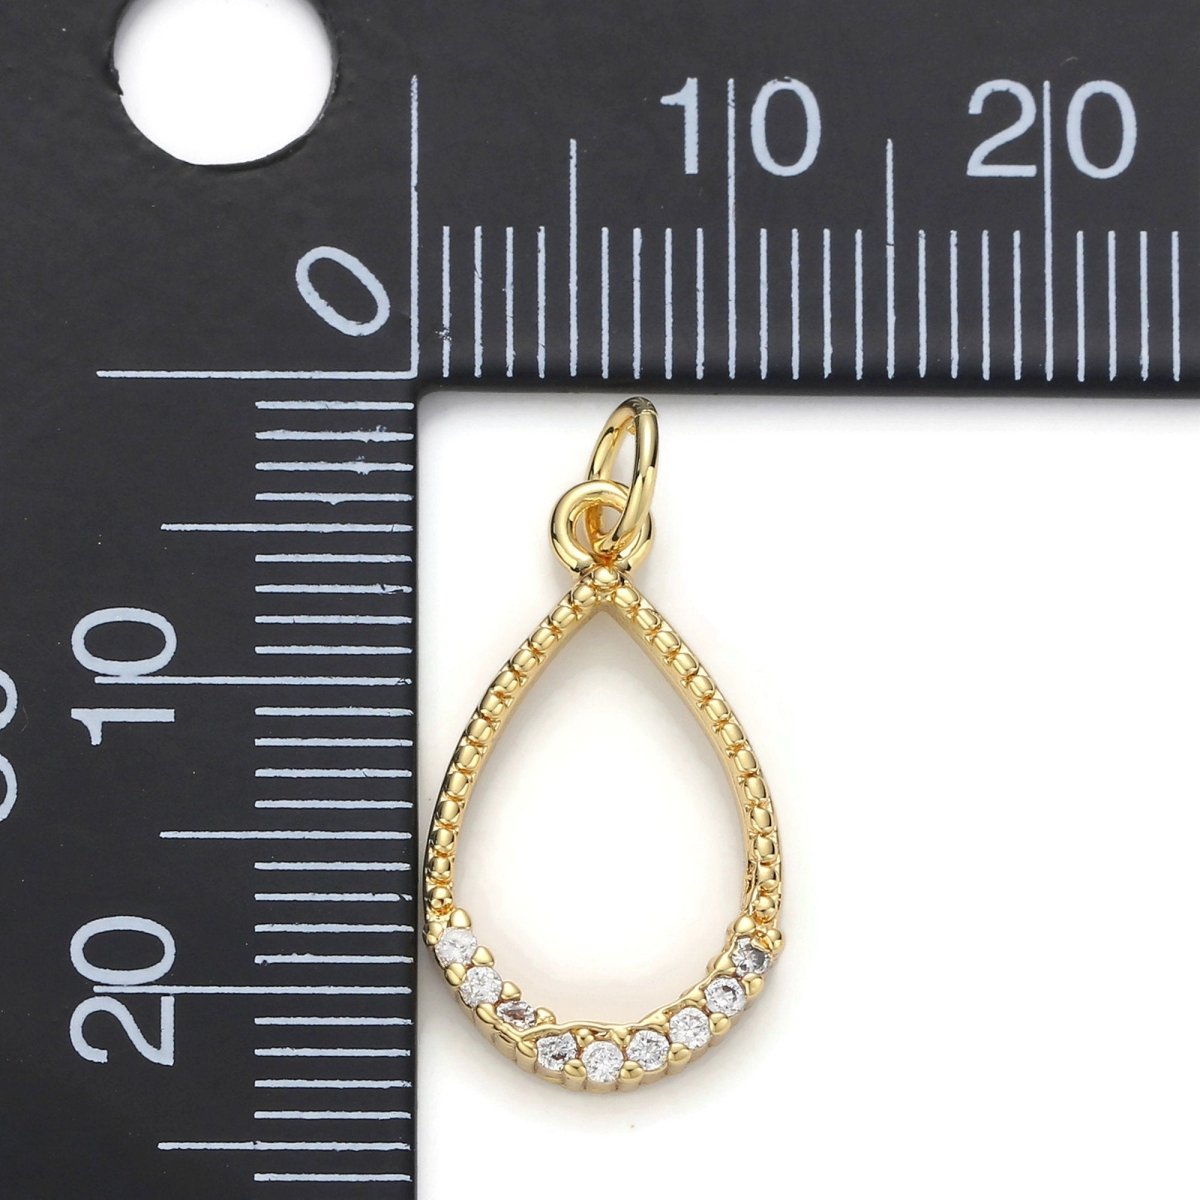 24k Gold Filled Micro Pave Geometric Oval Charm, Cubic Zirconia Geometric Oval Pendant Charm, Gold Filled Charm, For DIY Jewelry D-043 - DLUXCA